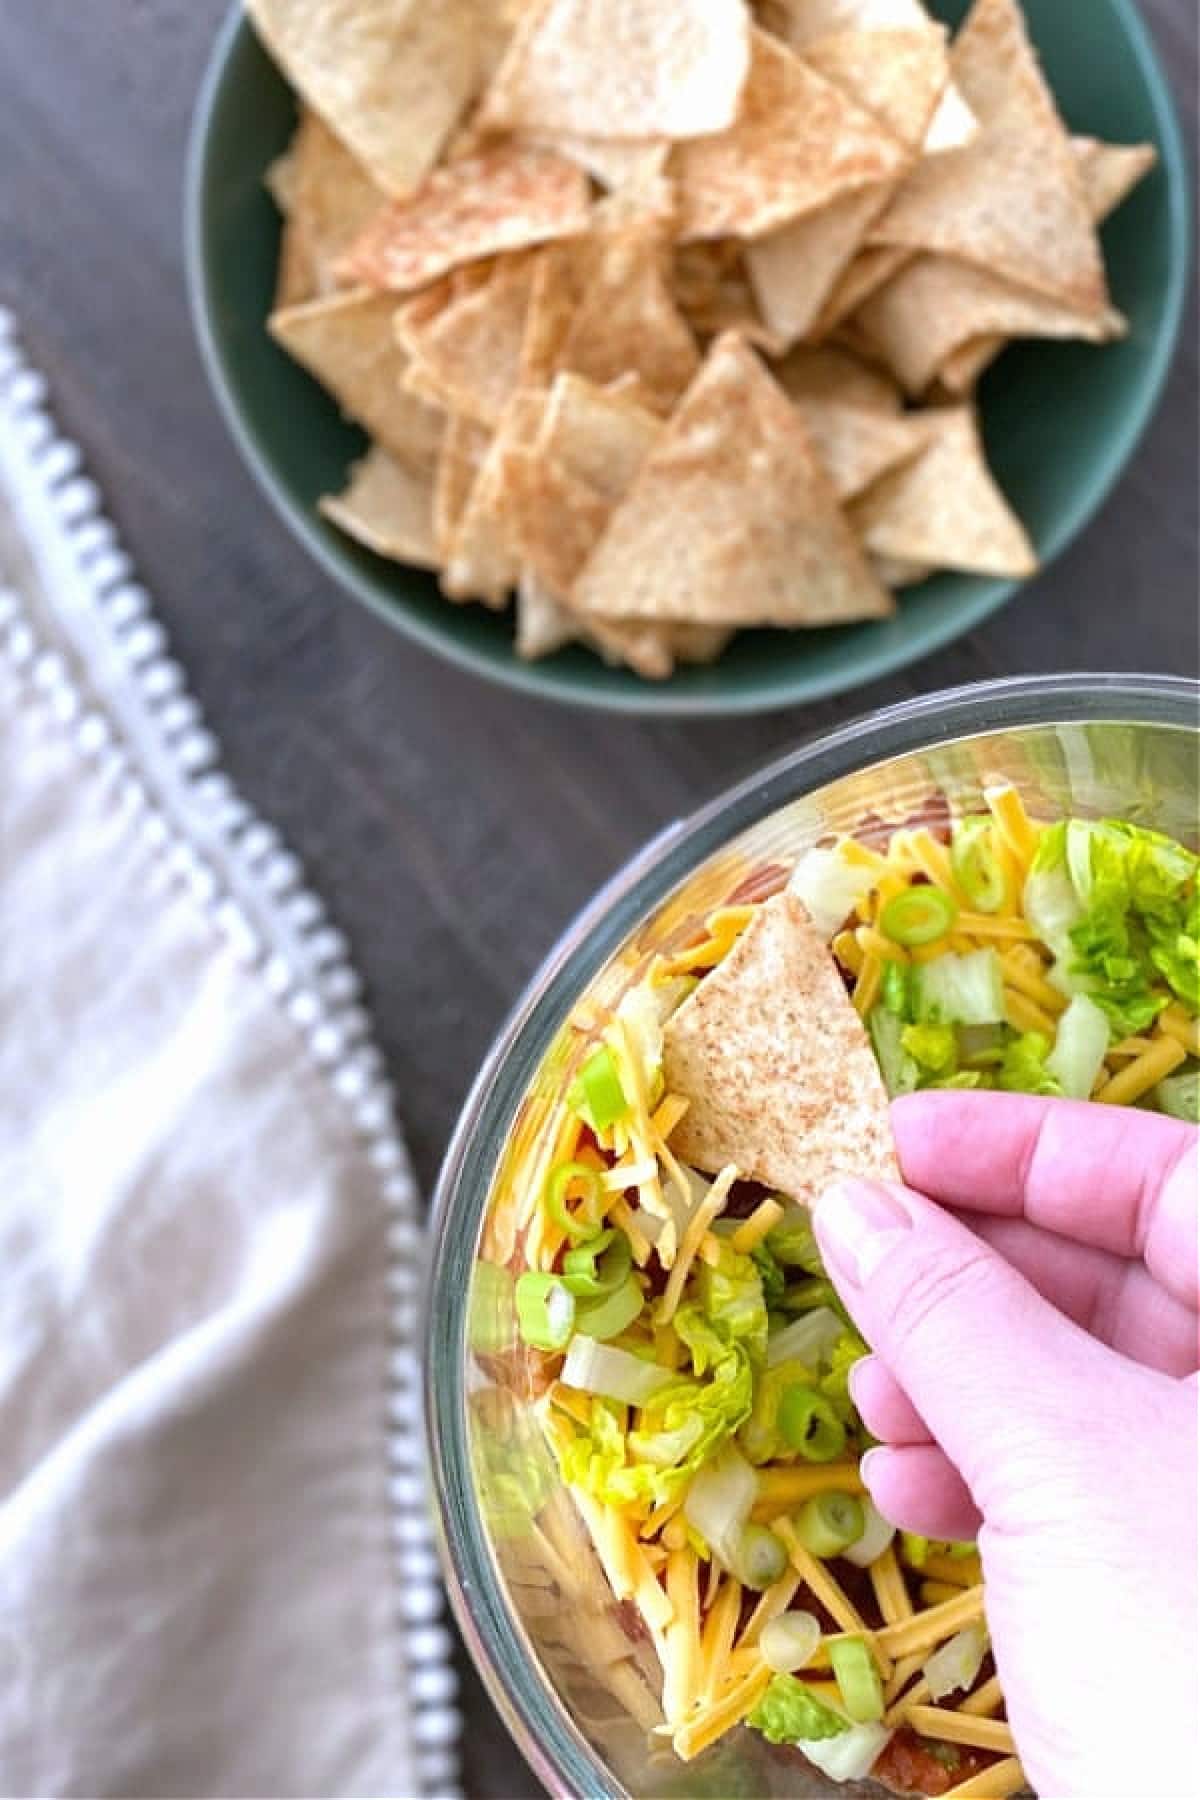 A hand scooping up dairy free seven layer dip with a tortilla chip.